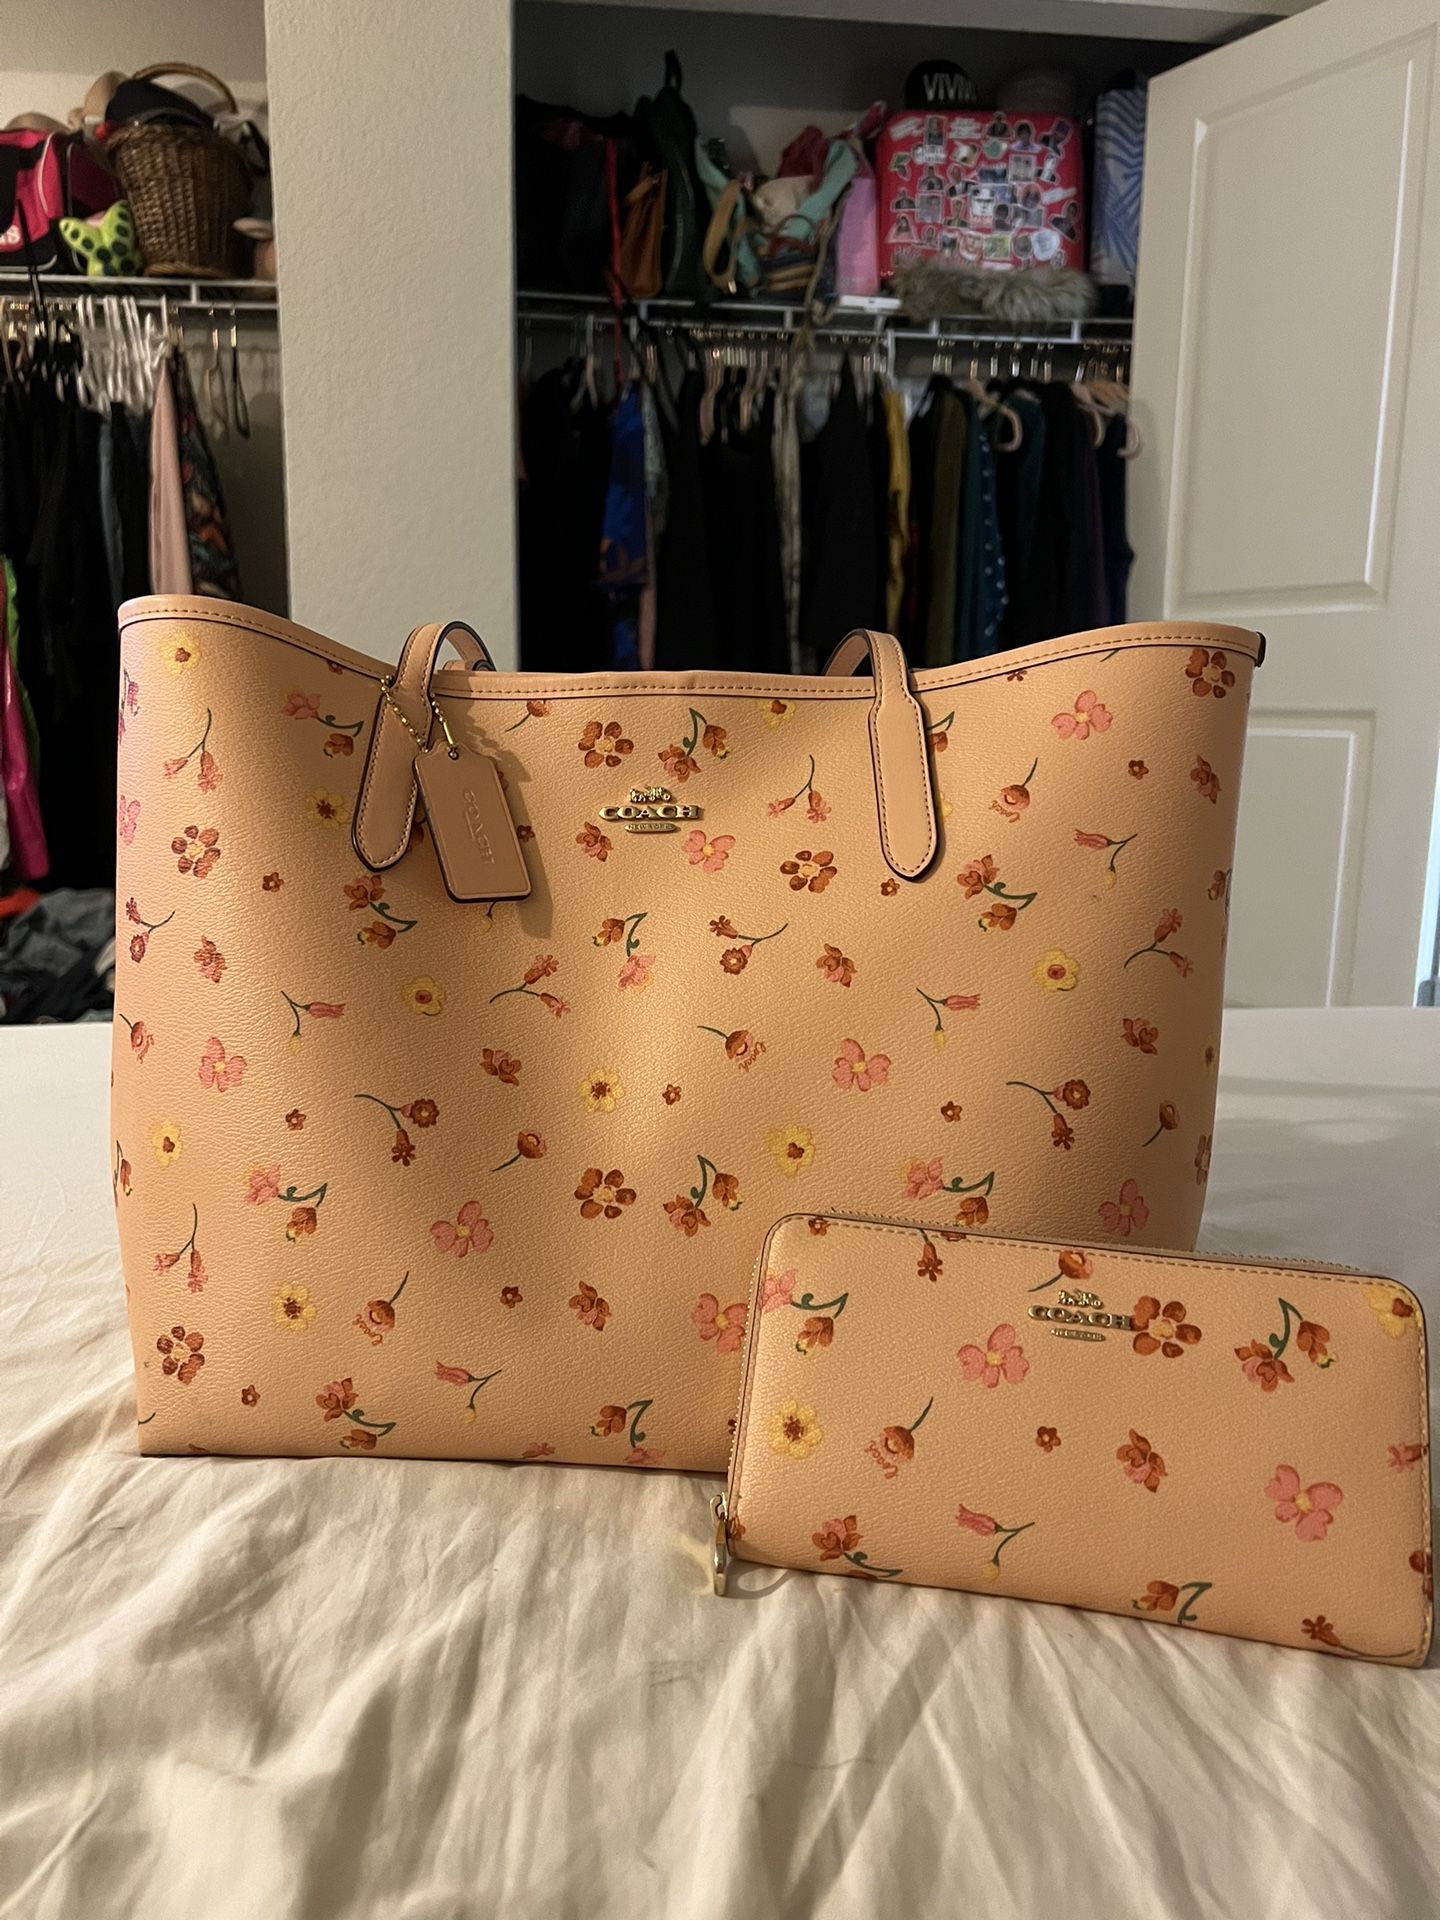 Coach Tote Purse And Matching Wallet 